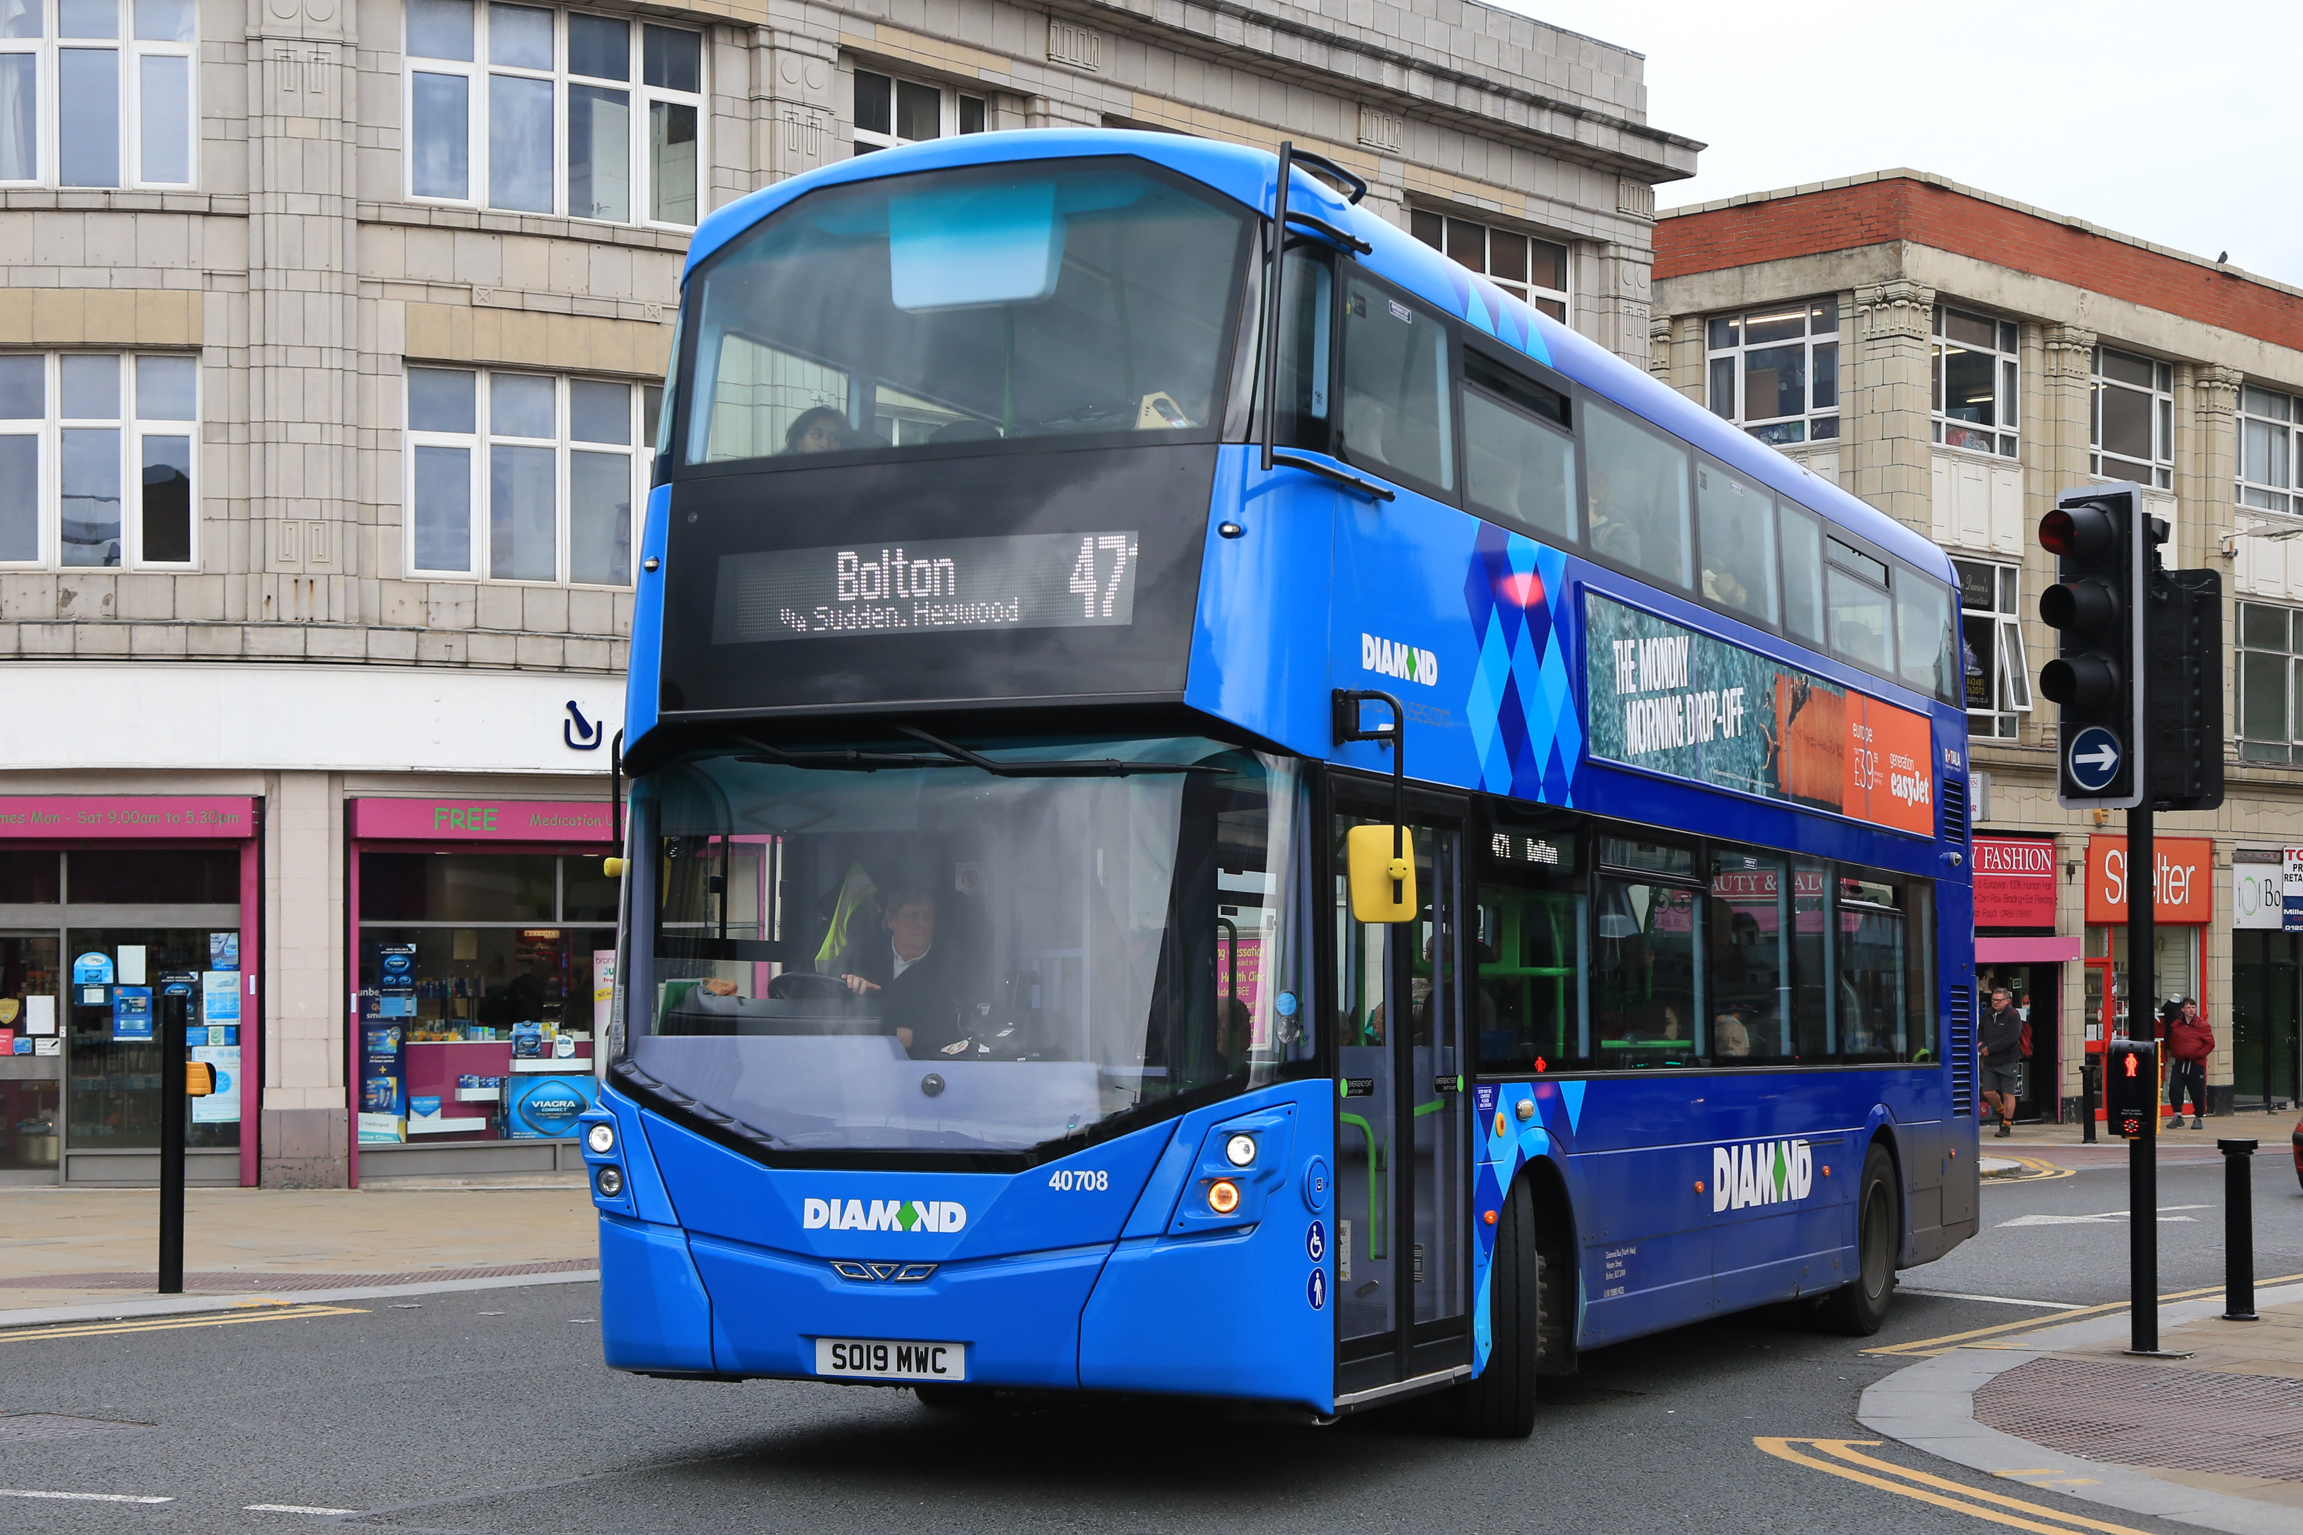 Wrightbus deal agreed